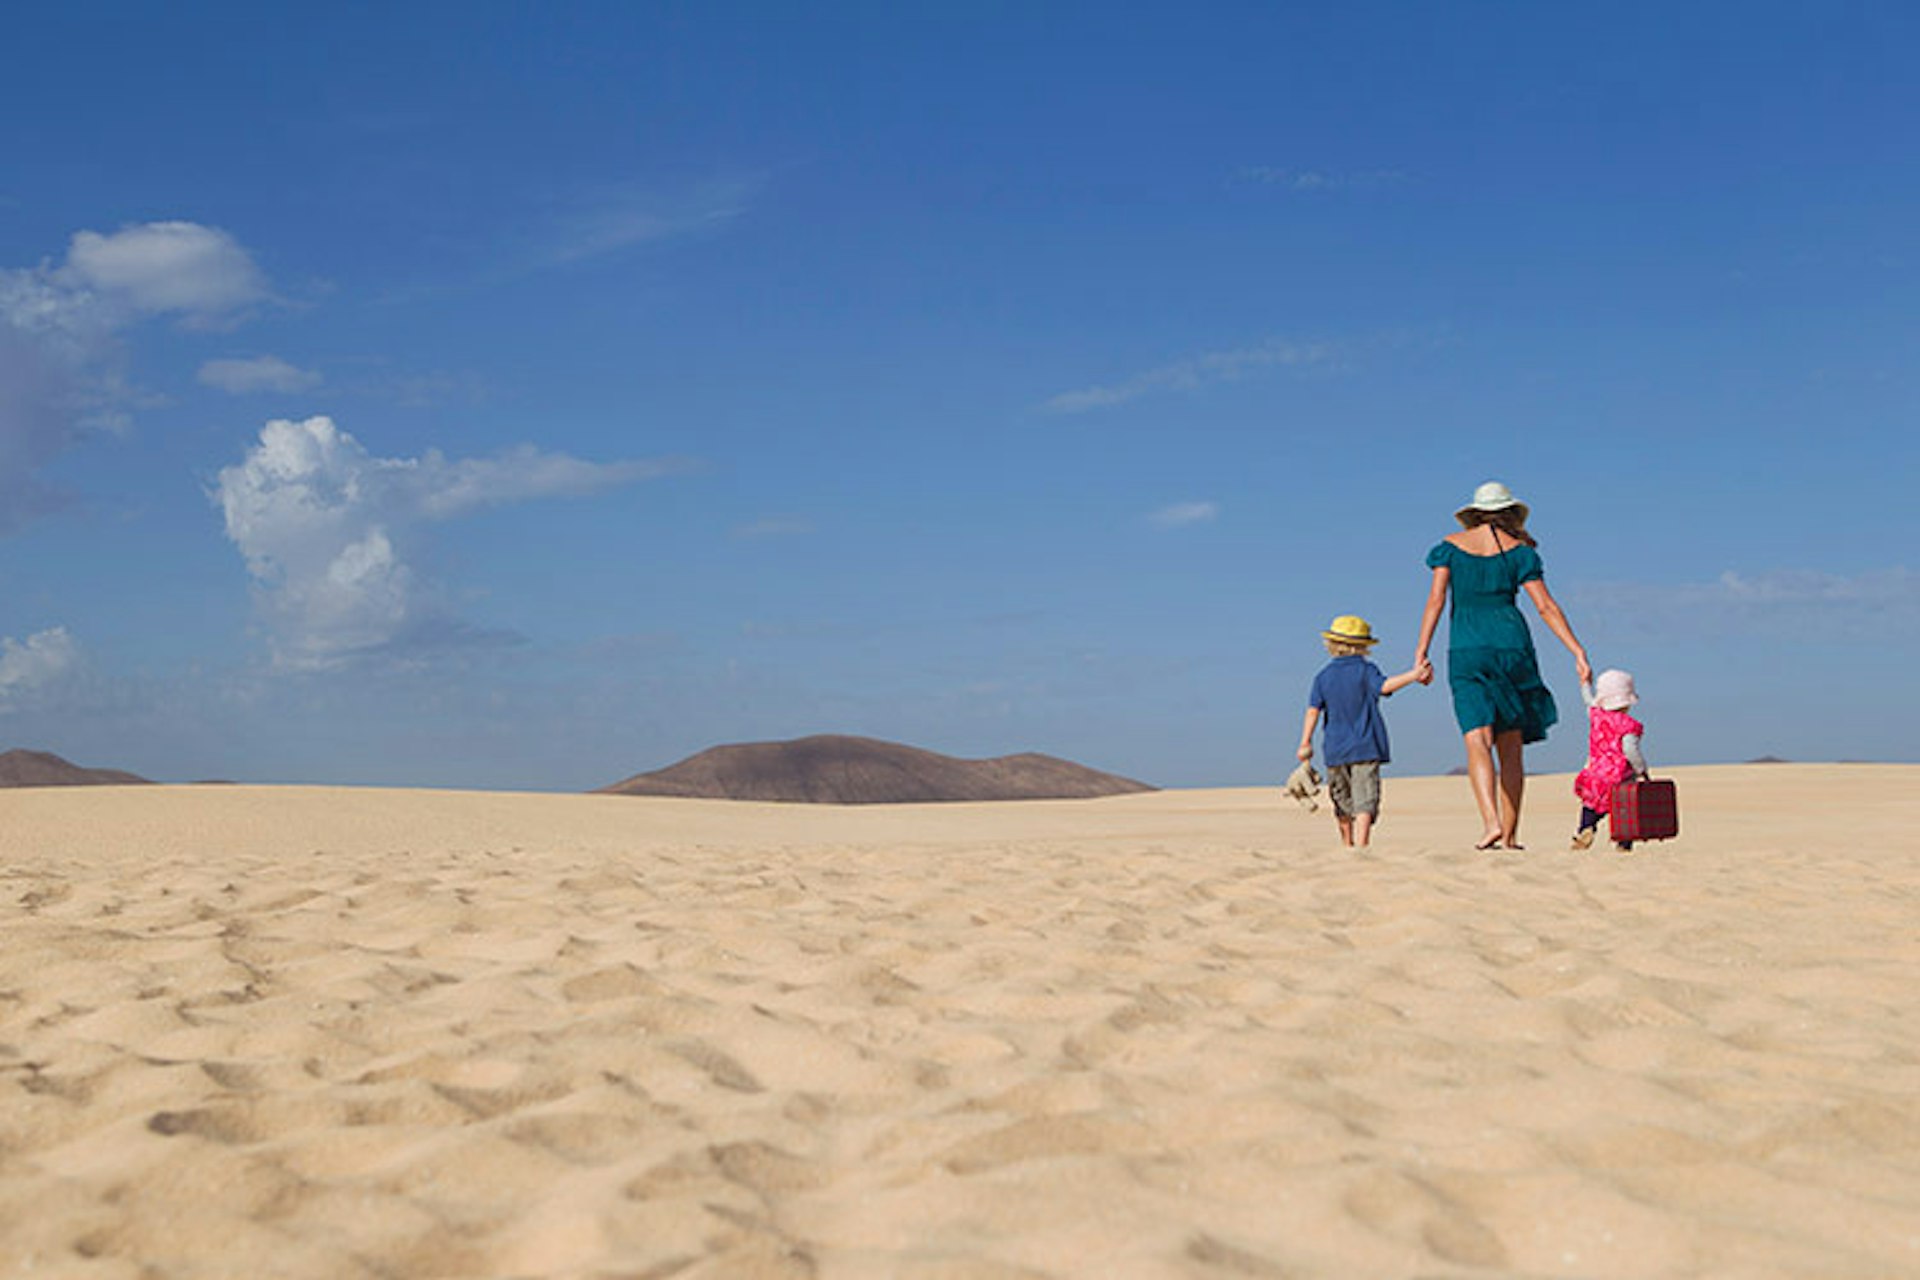 'You packed it, you can haul it over these dunes yourself.' The art of packing lightly is a valuable learning point for young travellers. Image by jackSTAR / Cultura / Getty Images